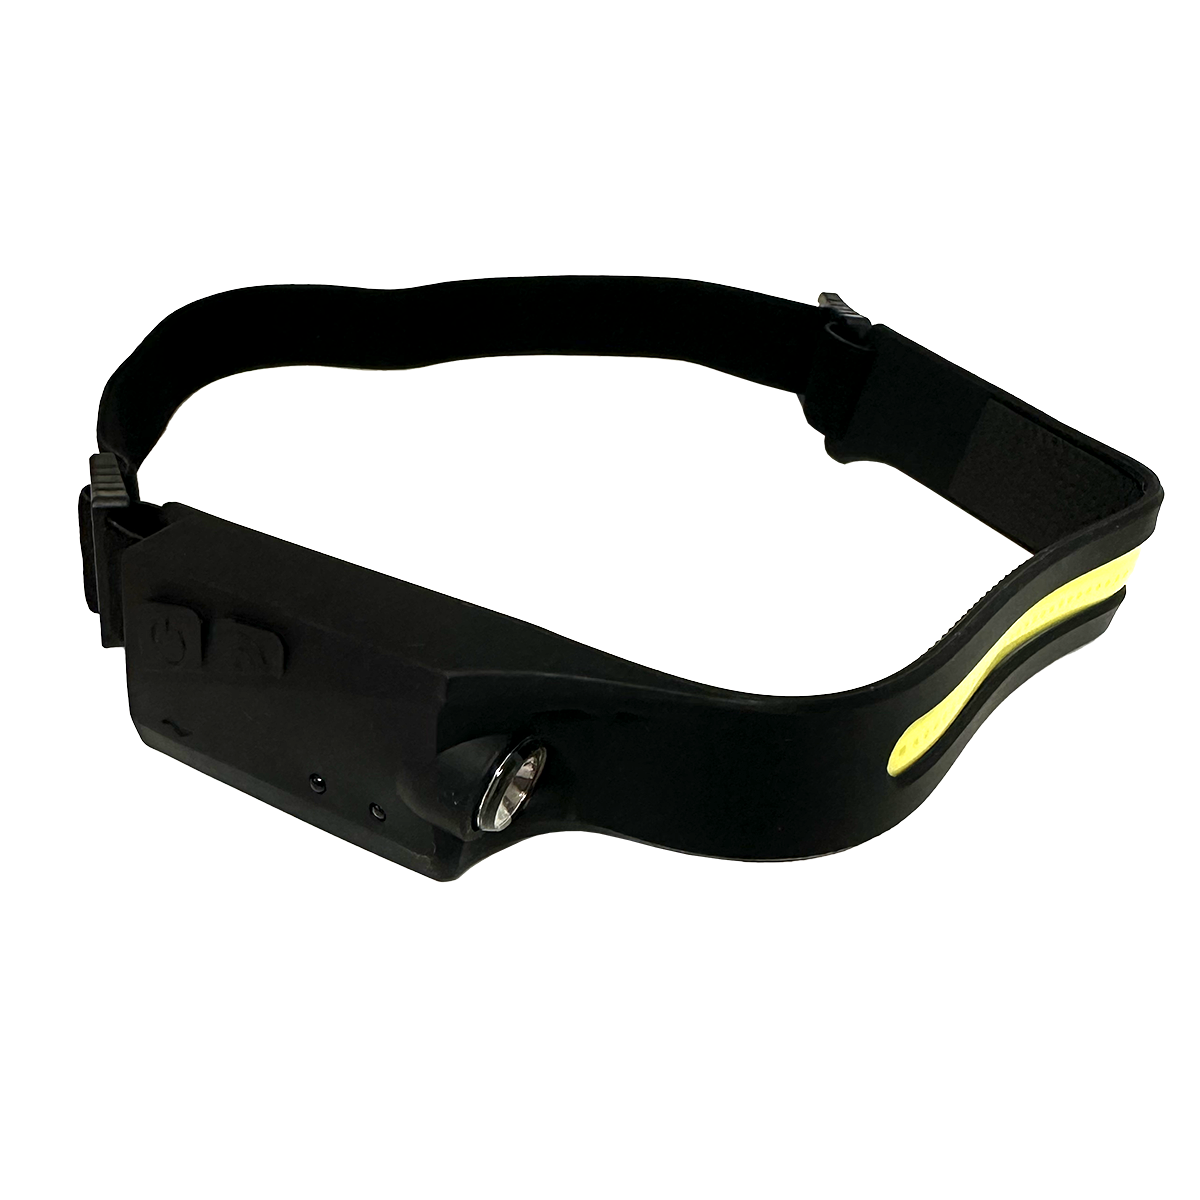 ITEM NUMBER 023977 MOTION ACTIVATED HEADLAMP FLASHLIGHT 6 PIECES PER DISPLAY